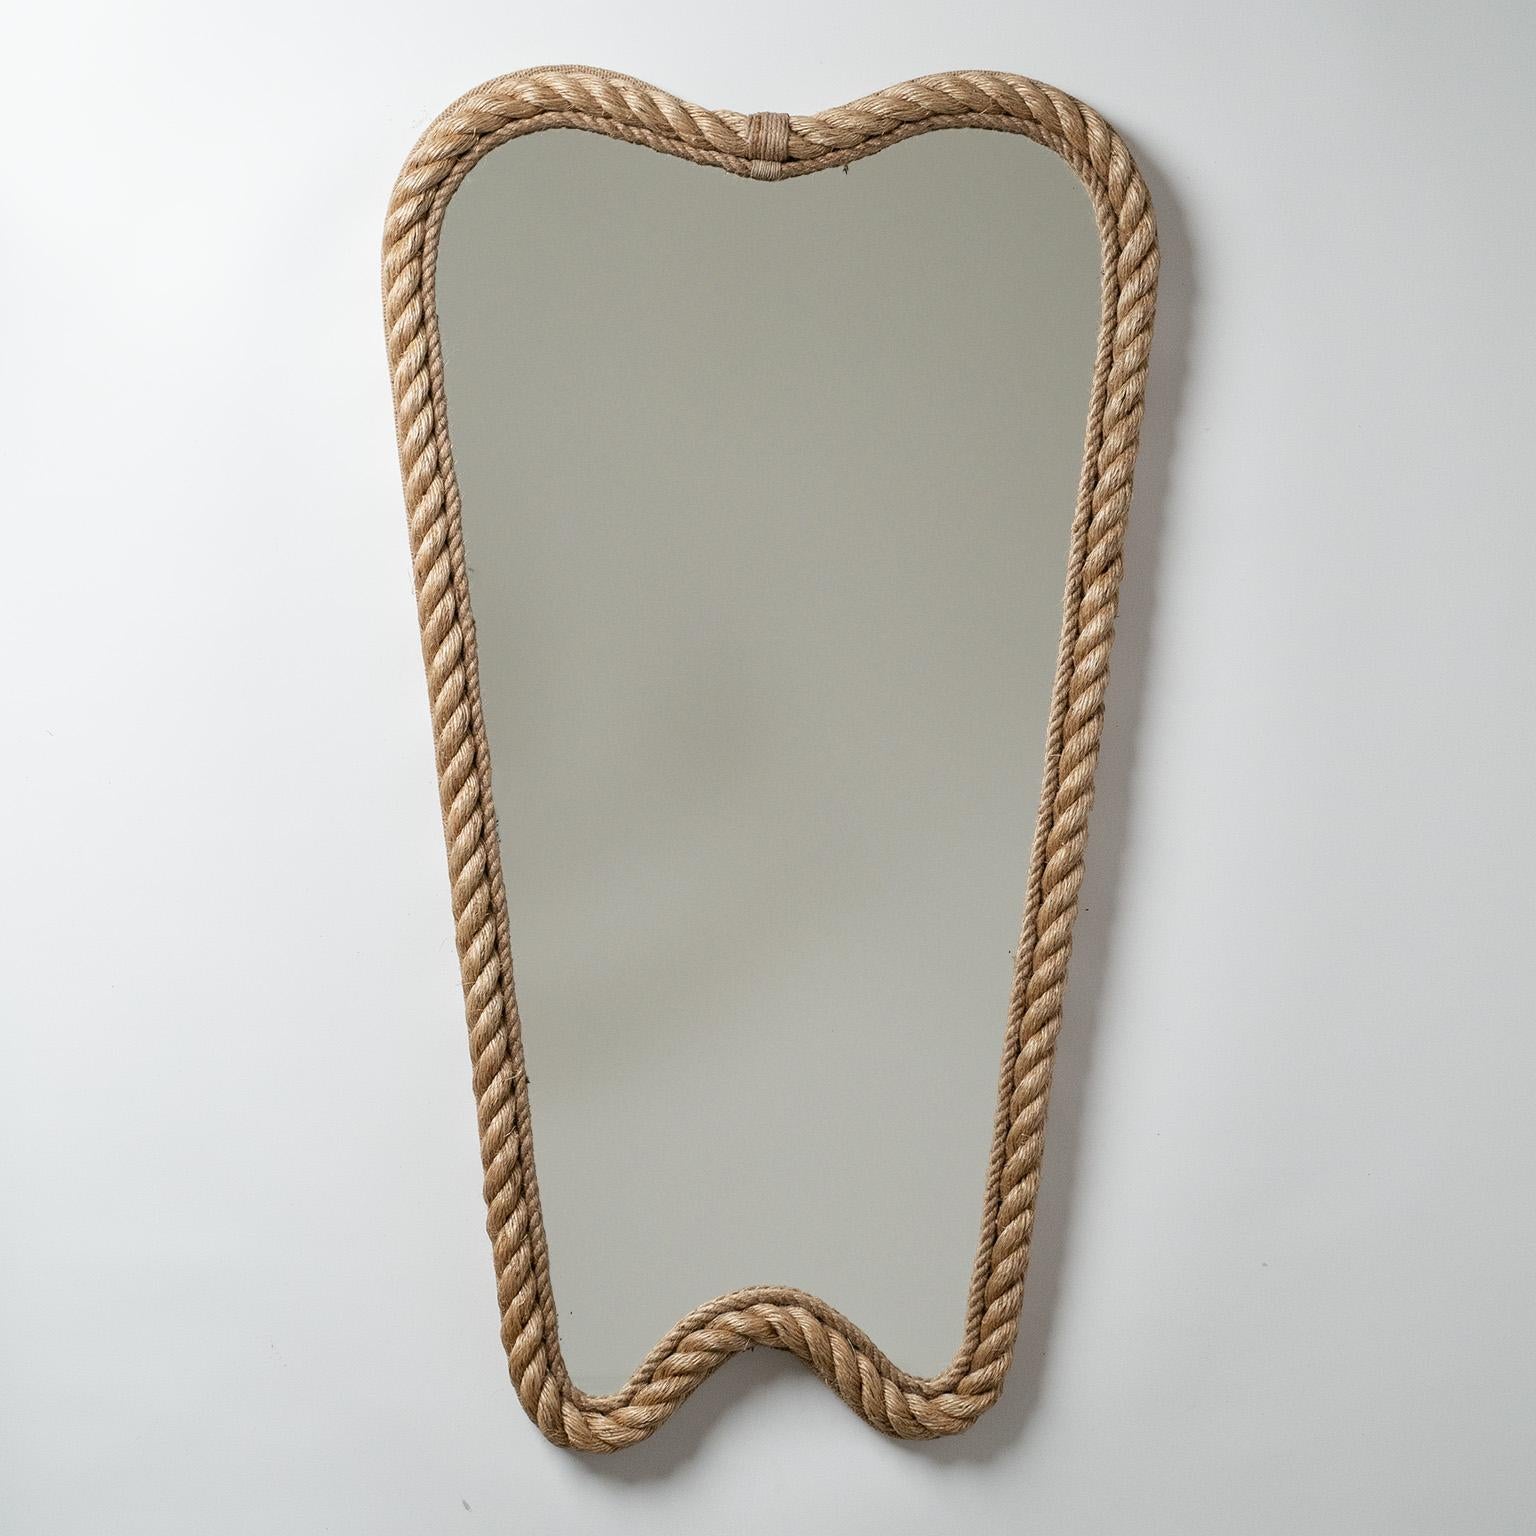 Lovely French artisanal rope mirror in the style of Adrien Audoux and Frida Minet. Slim, tall design with a thick twisted rope along the border. Width at the bottom is 34cm/13.5inches.